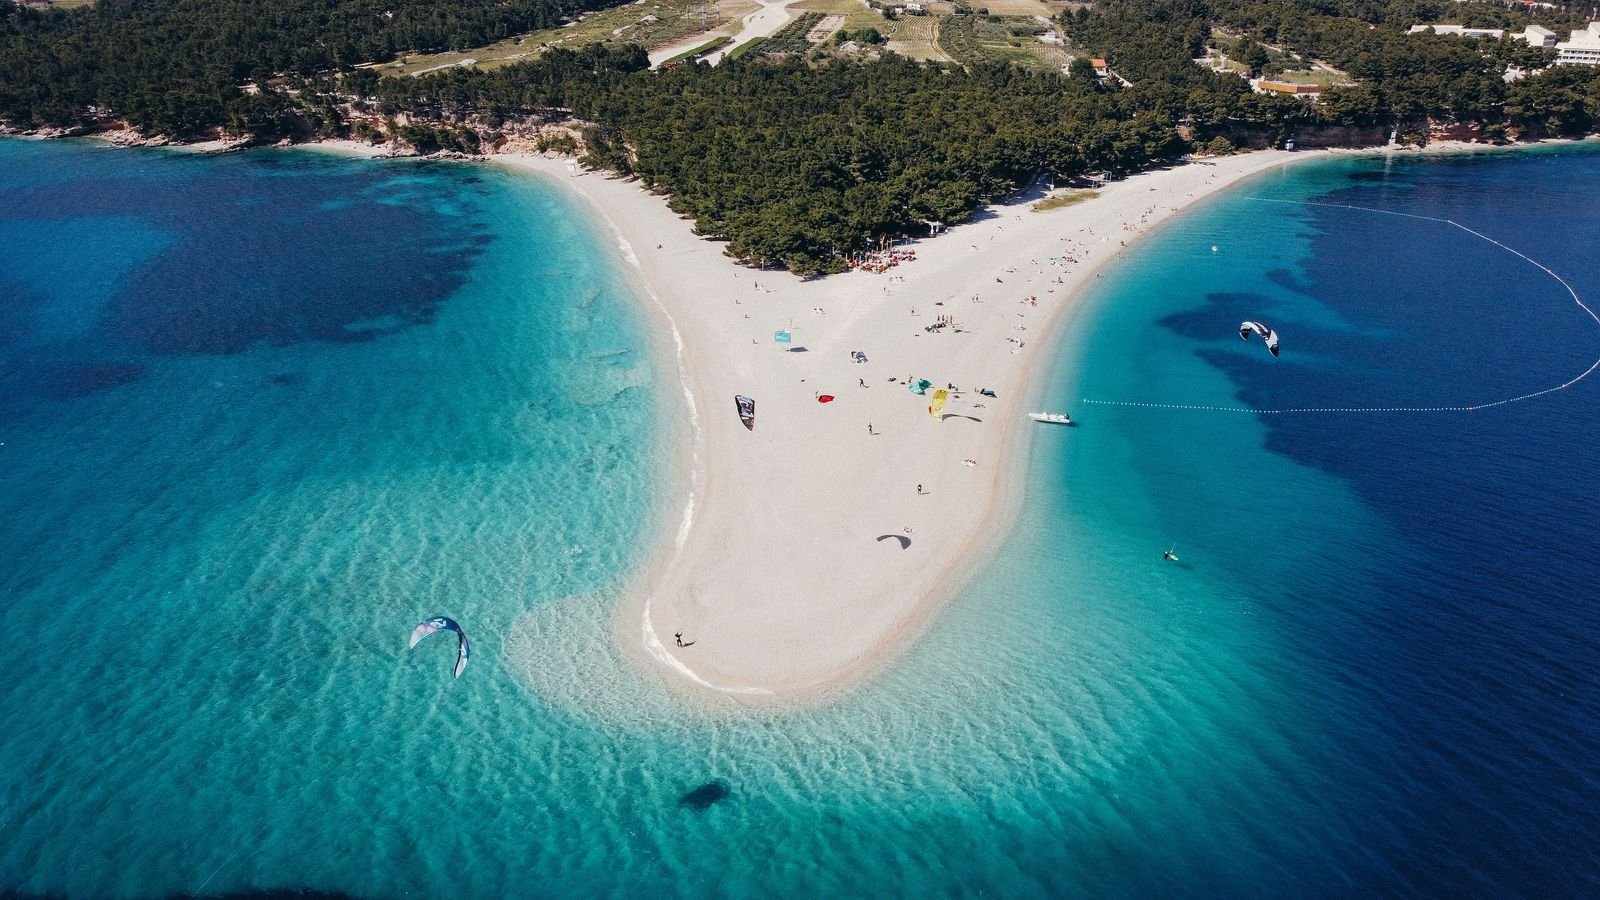 drone shot of a sand bar beach shooting out from the coast with turquoise blue shades of sea all around and kite surfers